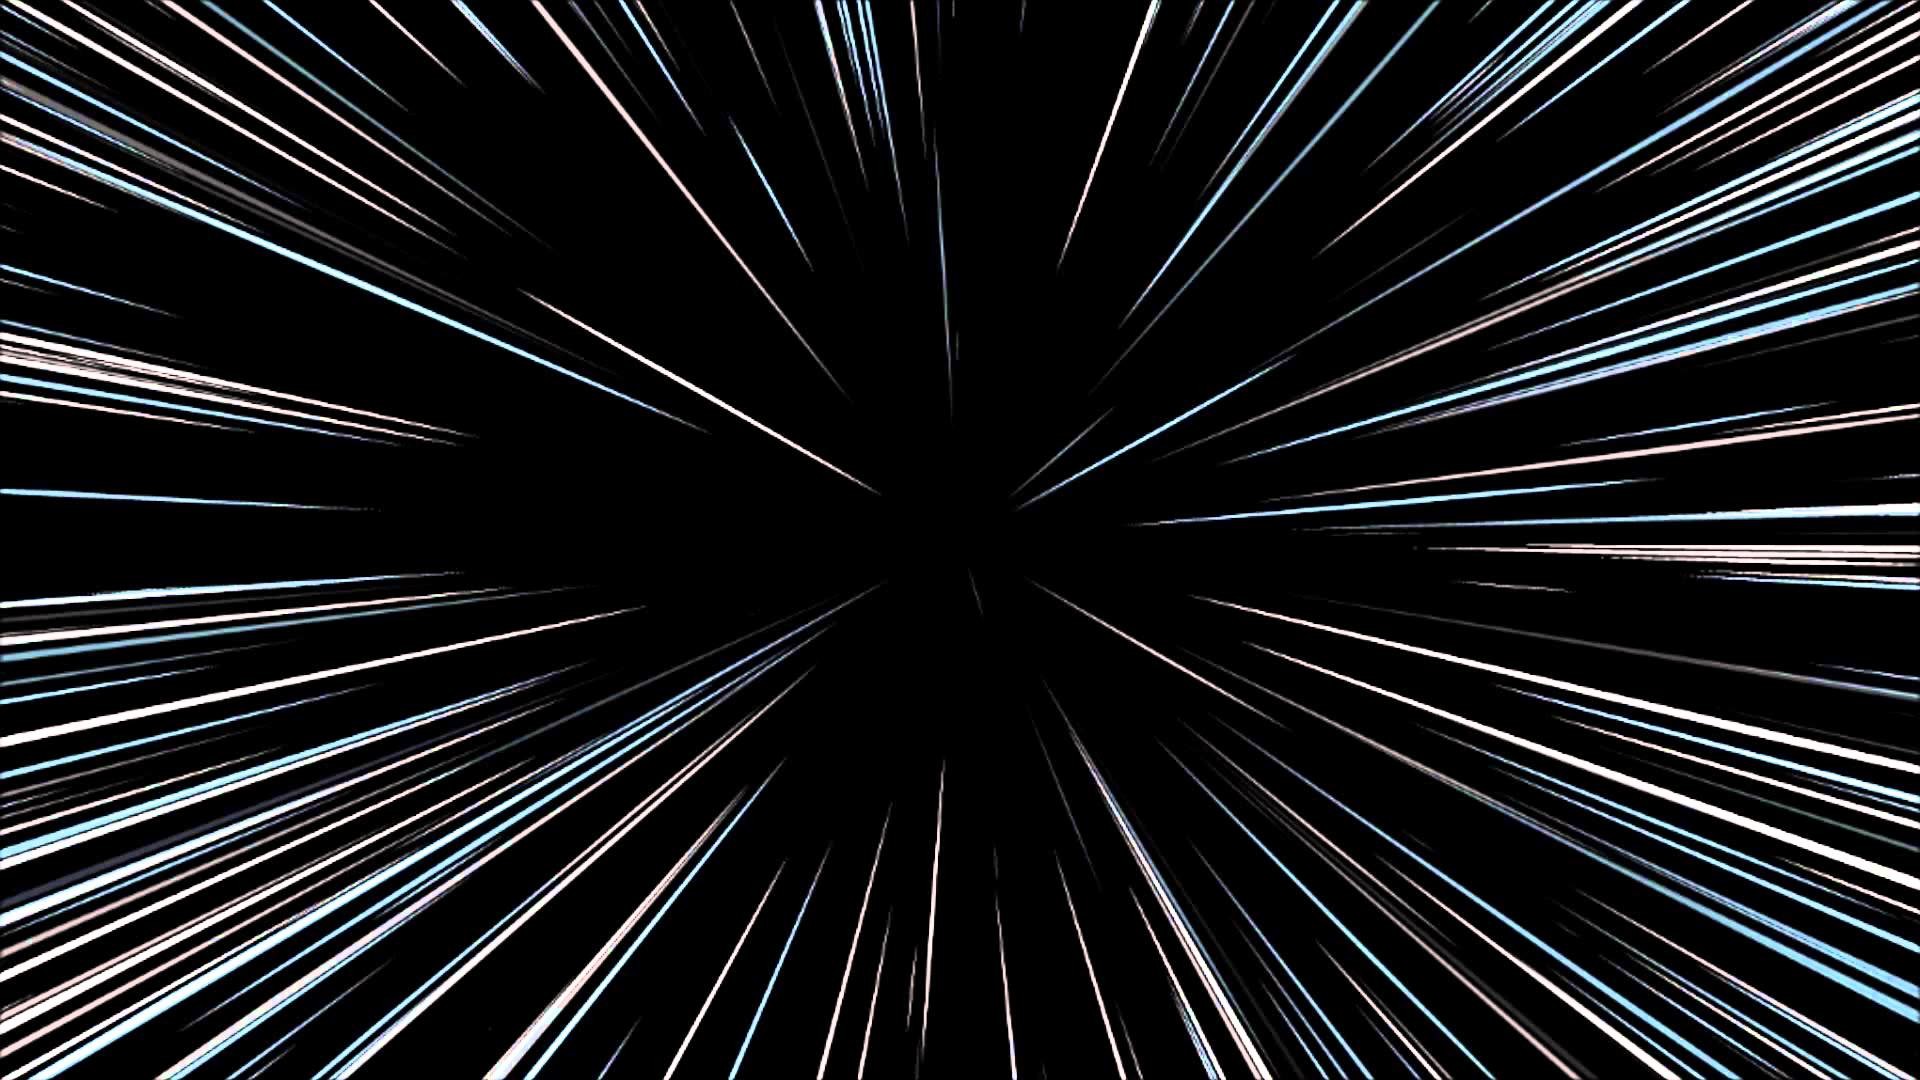 star wars jump to lightspeed in reverse as viewed from rear of .